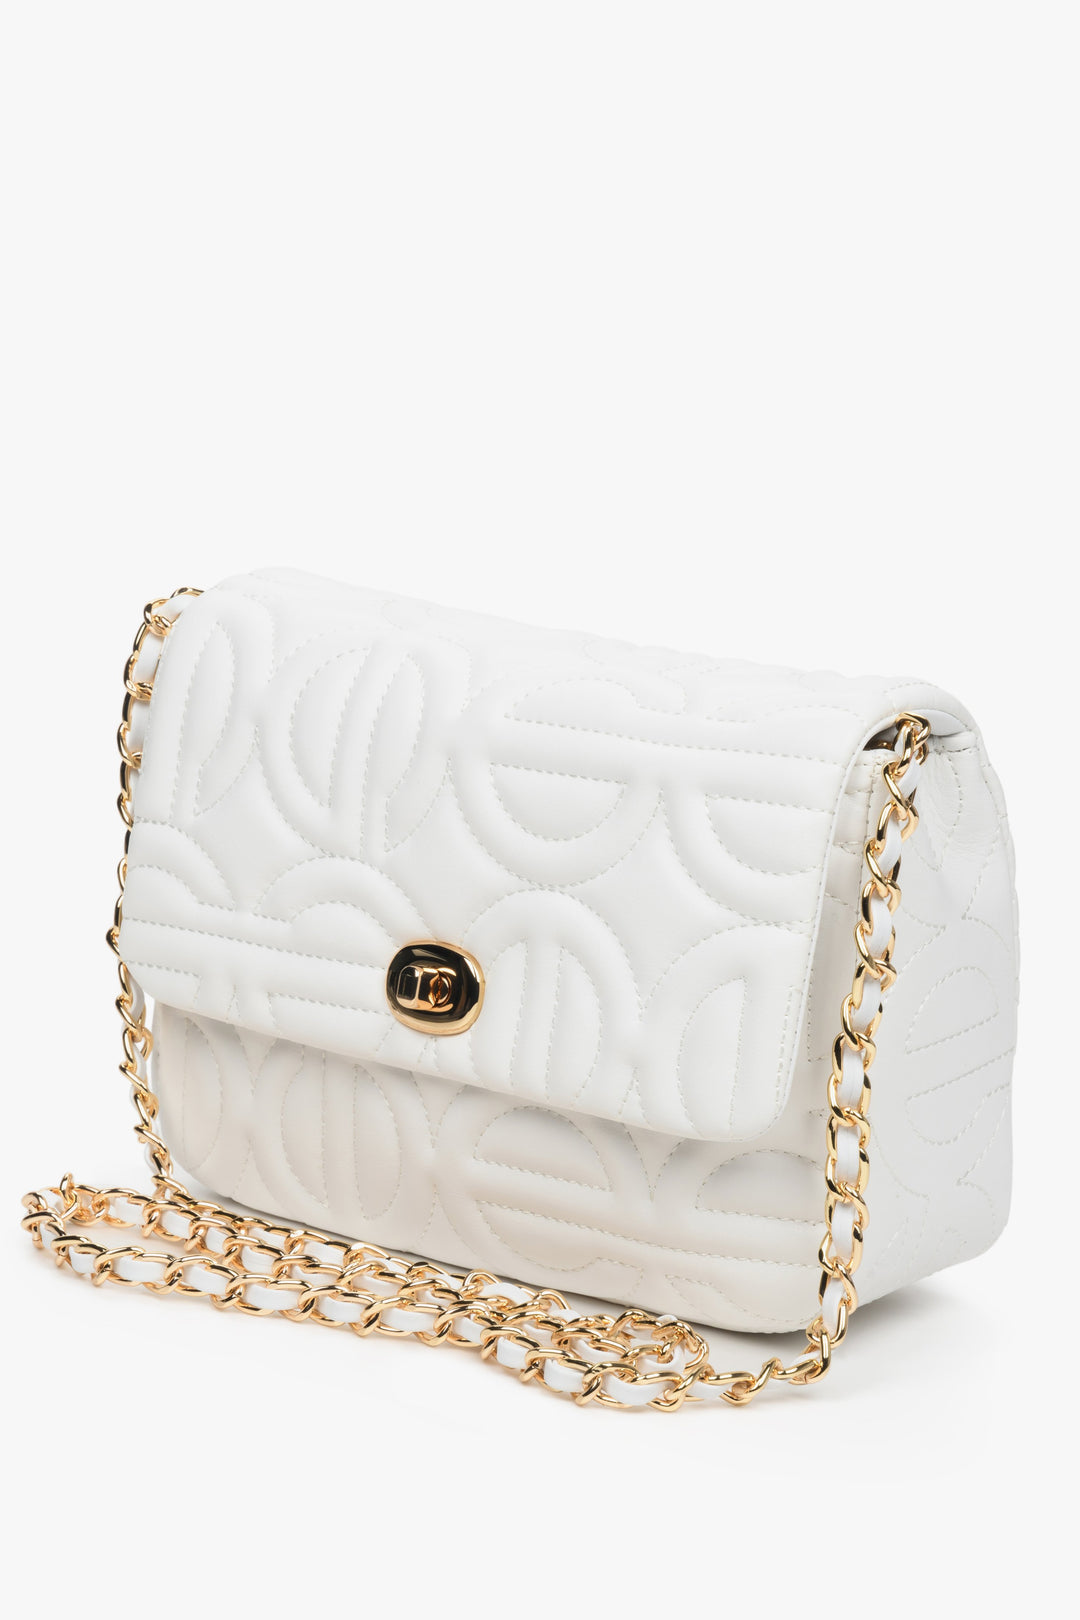 Women's Small White Shoulder Bag with a Gold Chain Estro ER00112087.